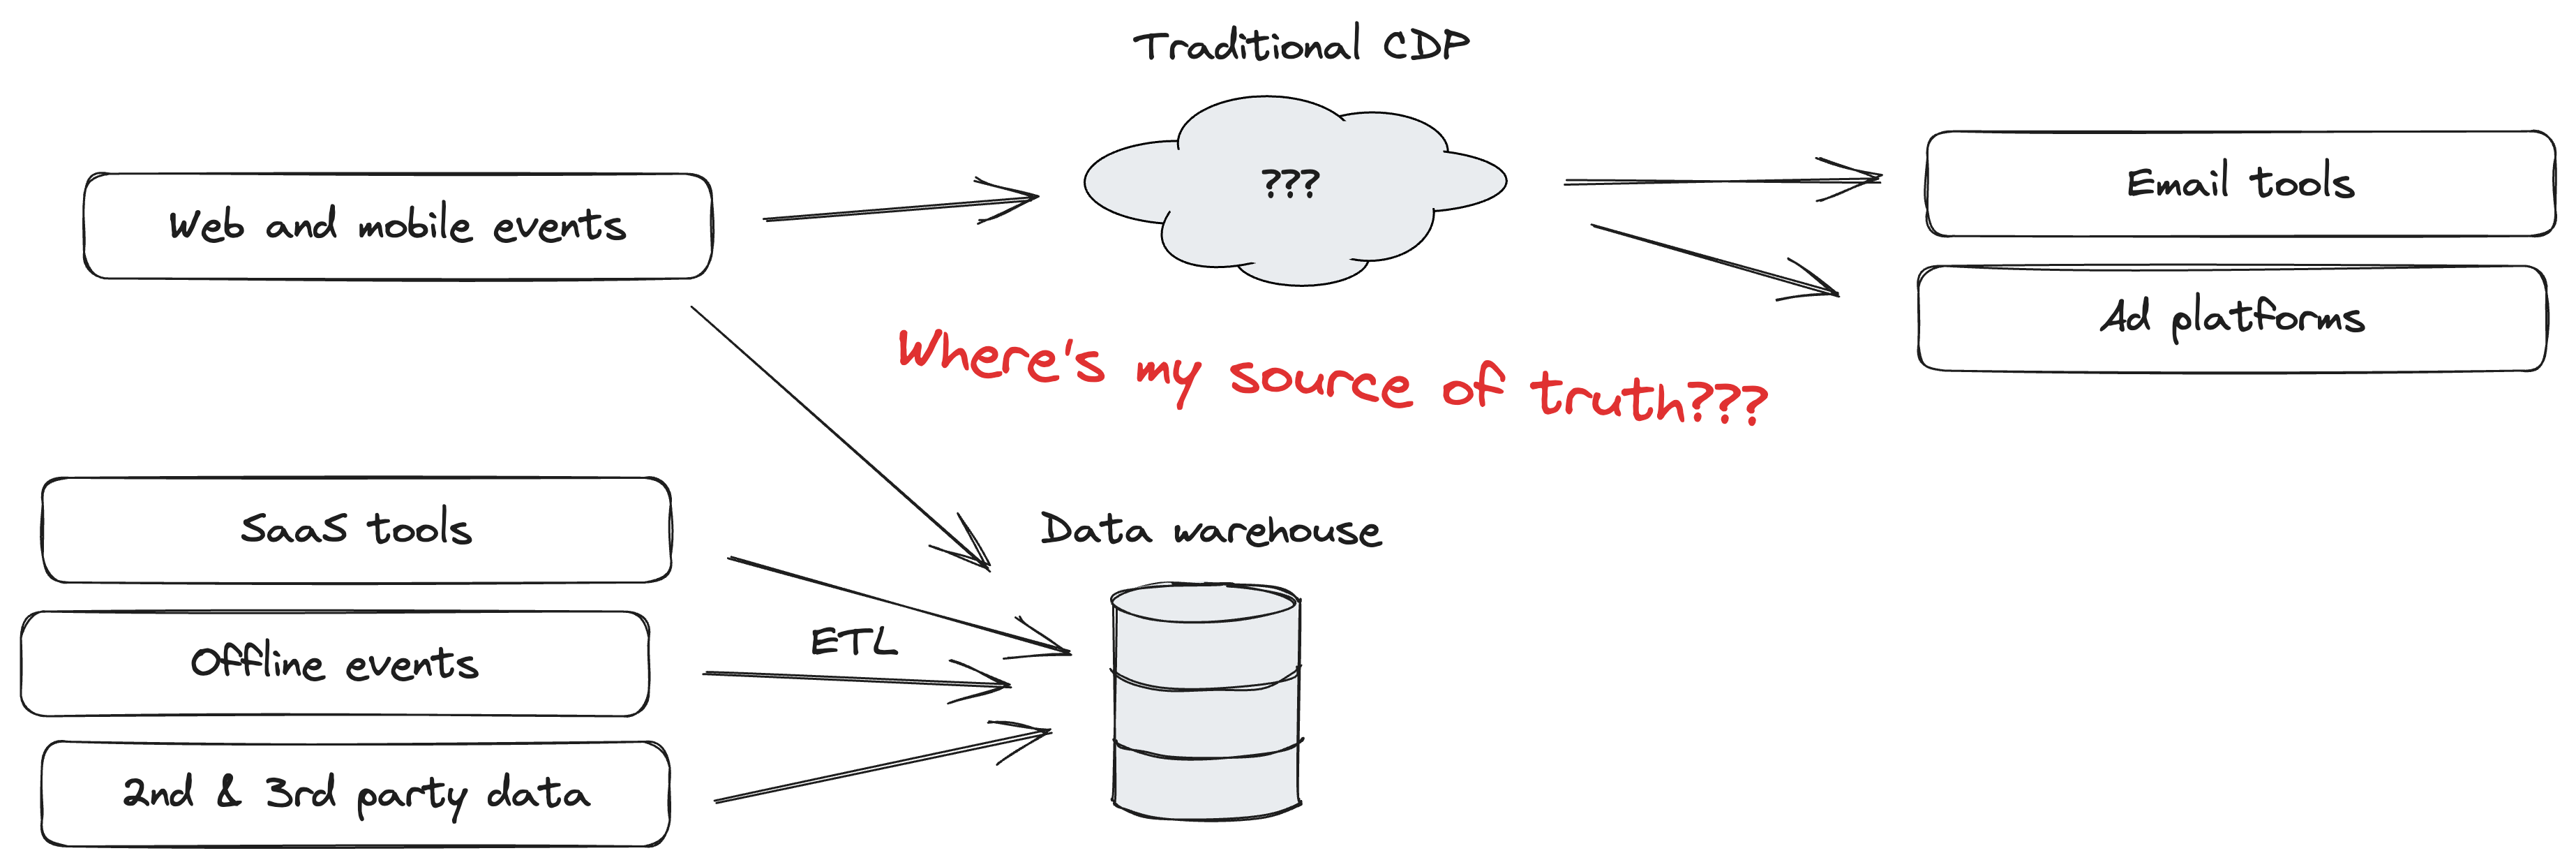 Traditional CDP Architecture